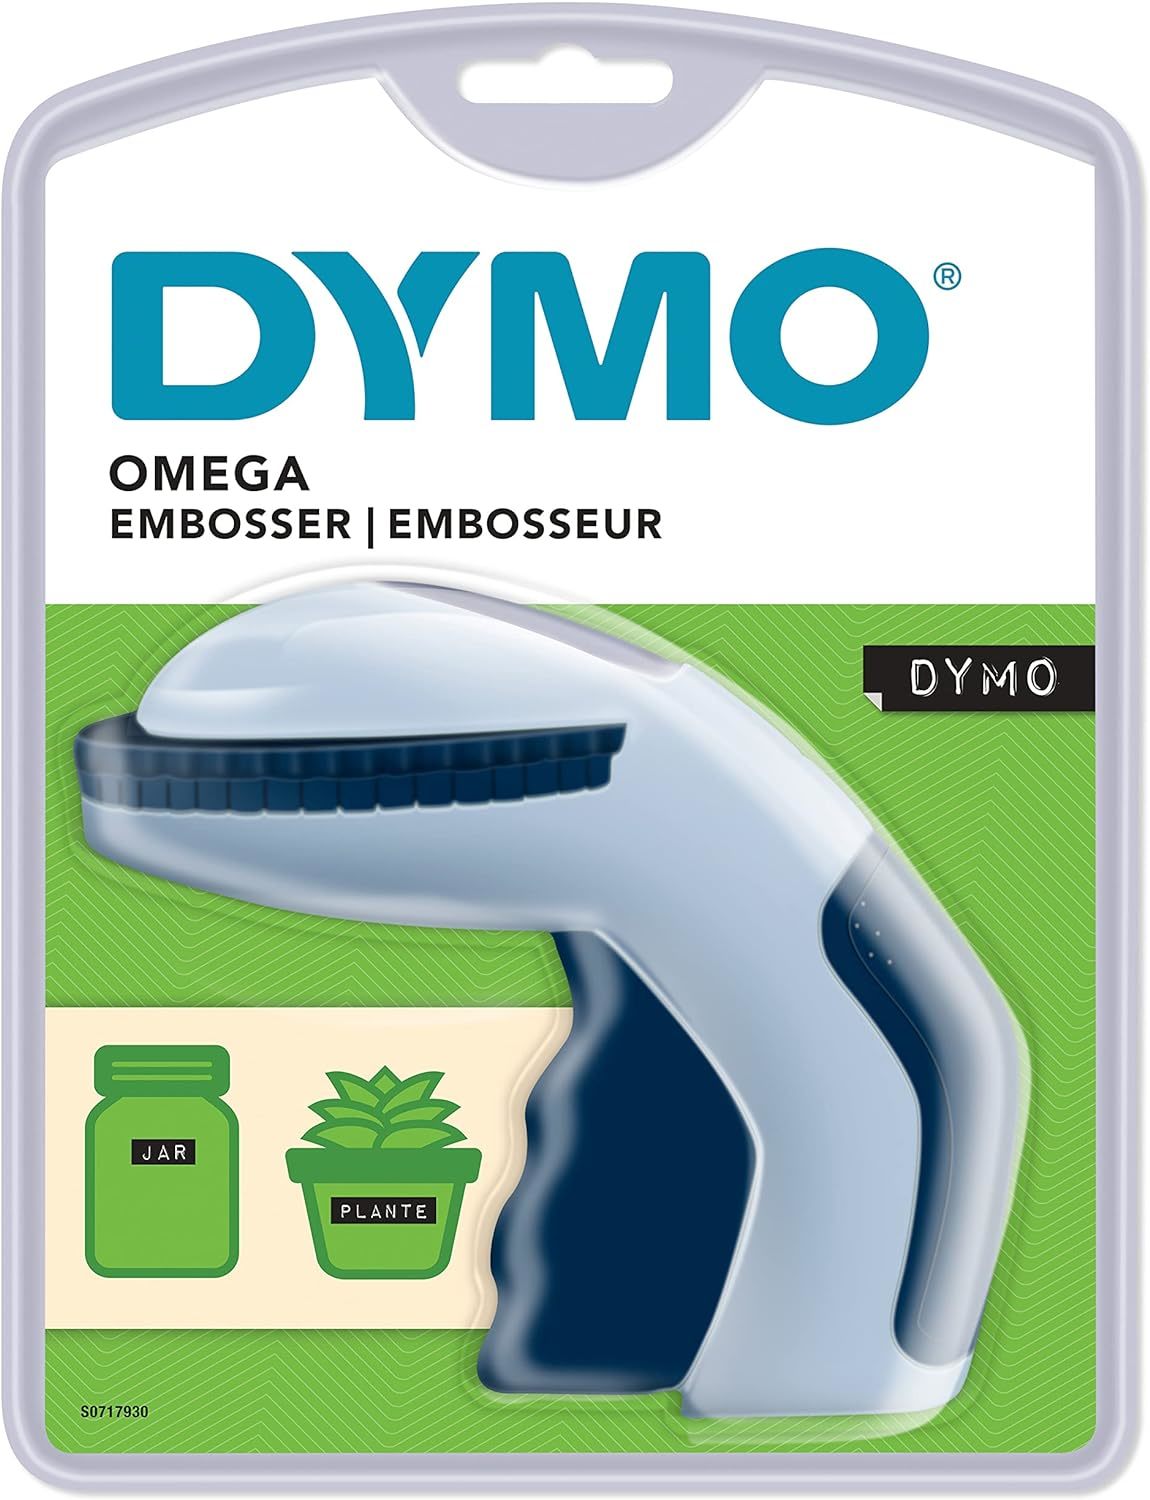 Primary image for Home Embossing Label Maker By Dymo Omega.